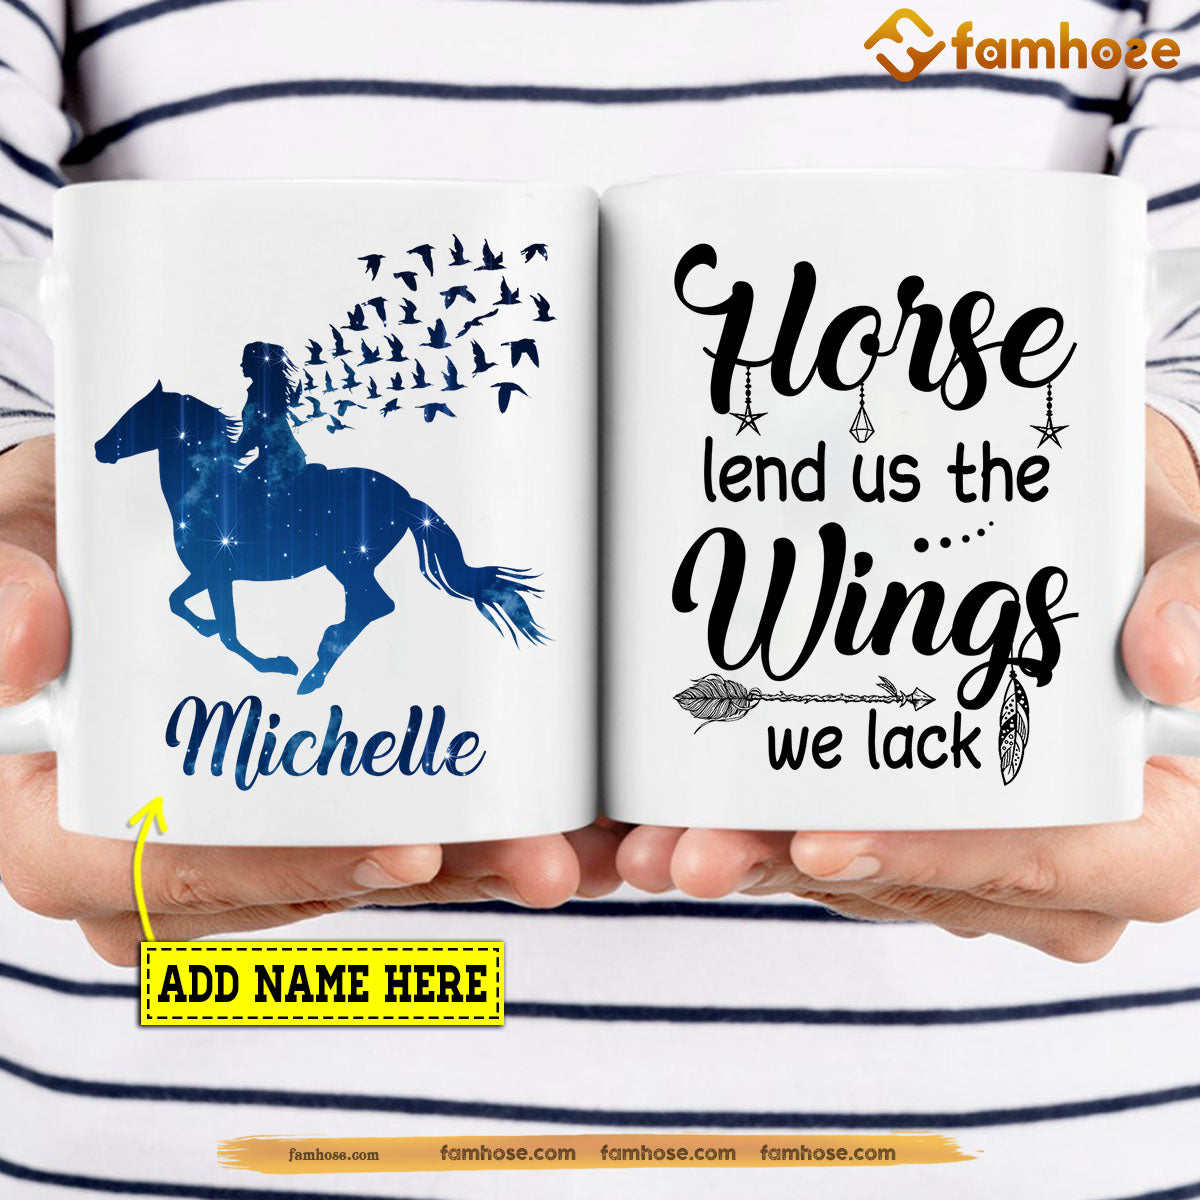 Personalized Horse Mug, Horse Lend Us The Wings We Lack Mug, Cups Gift For Horse Lovers, Horse Owner